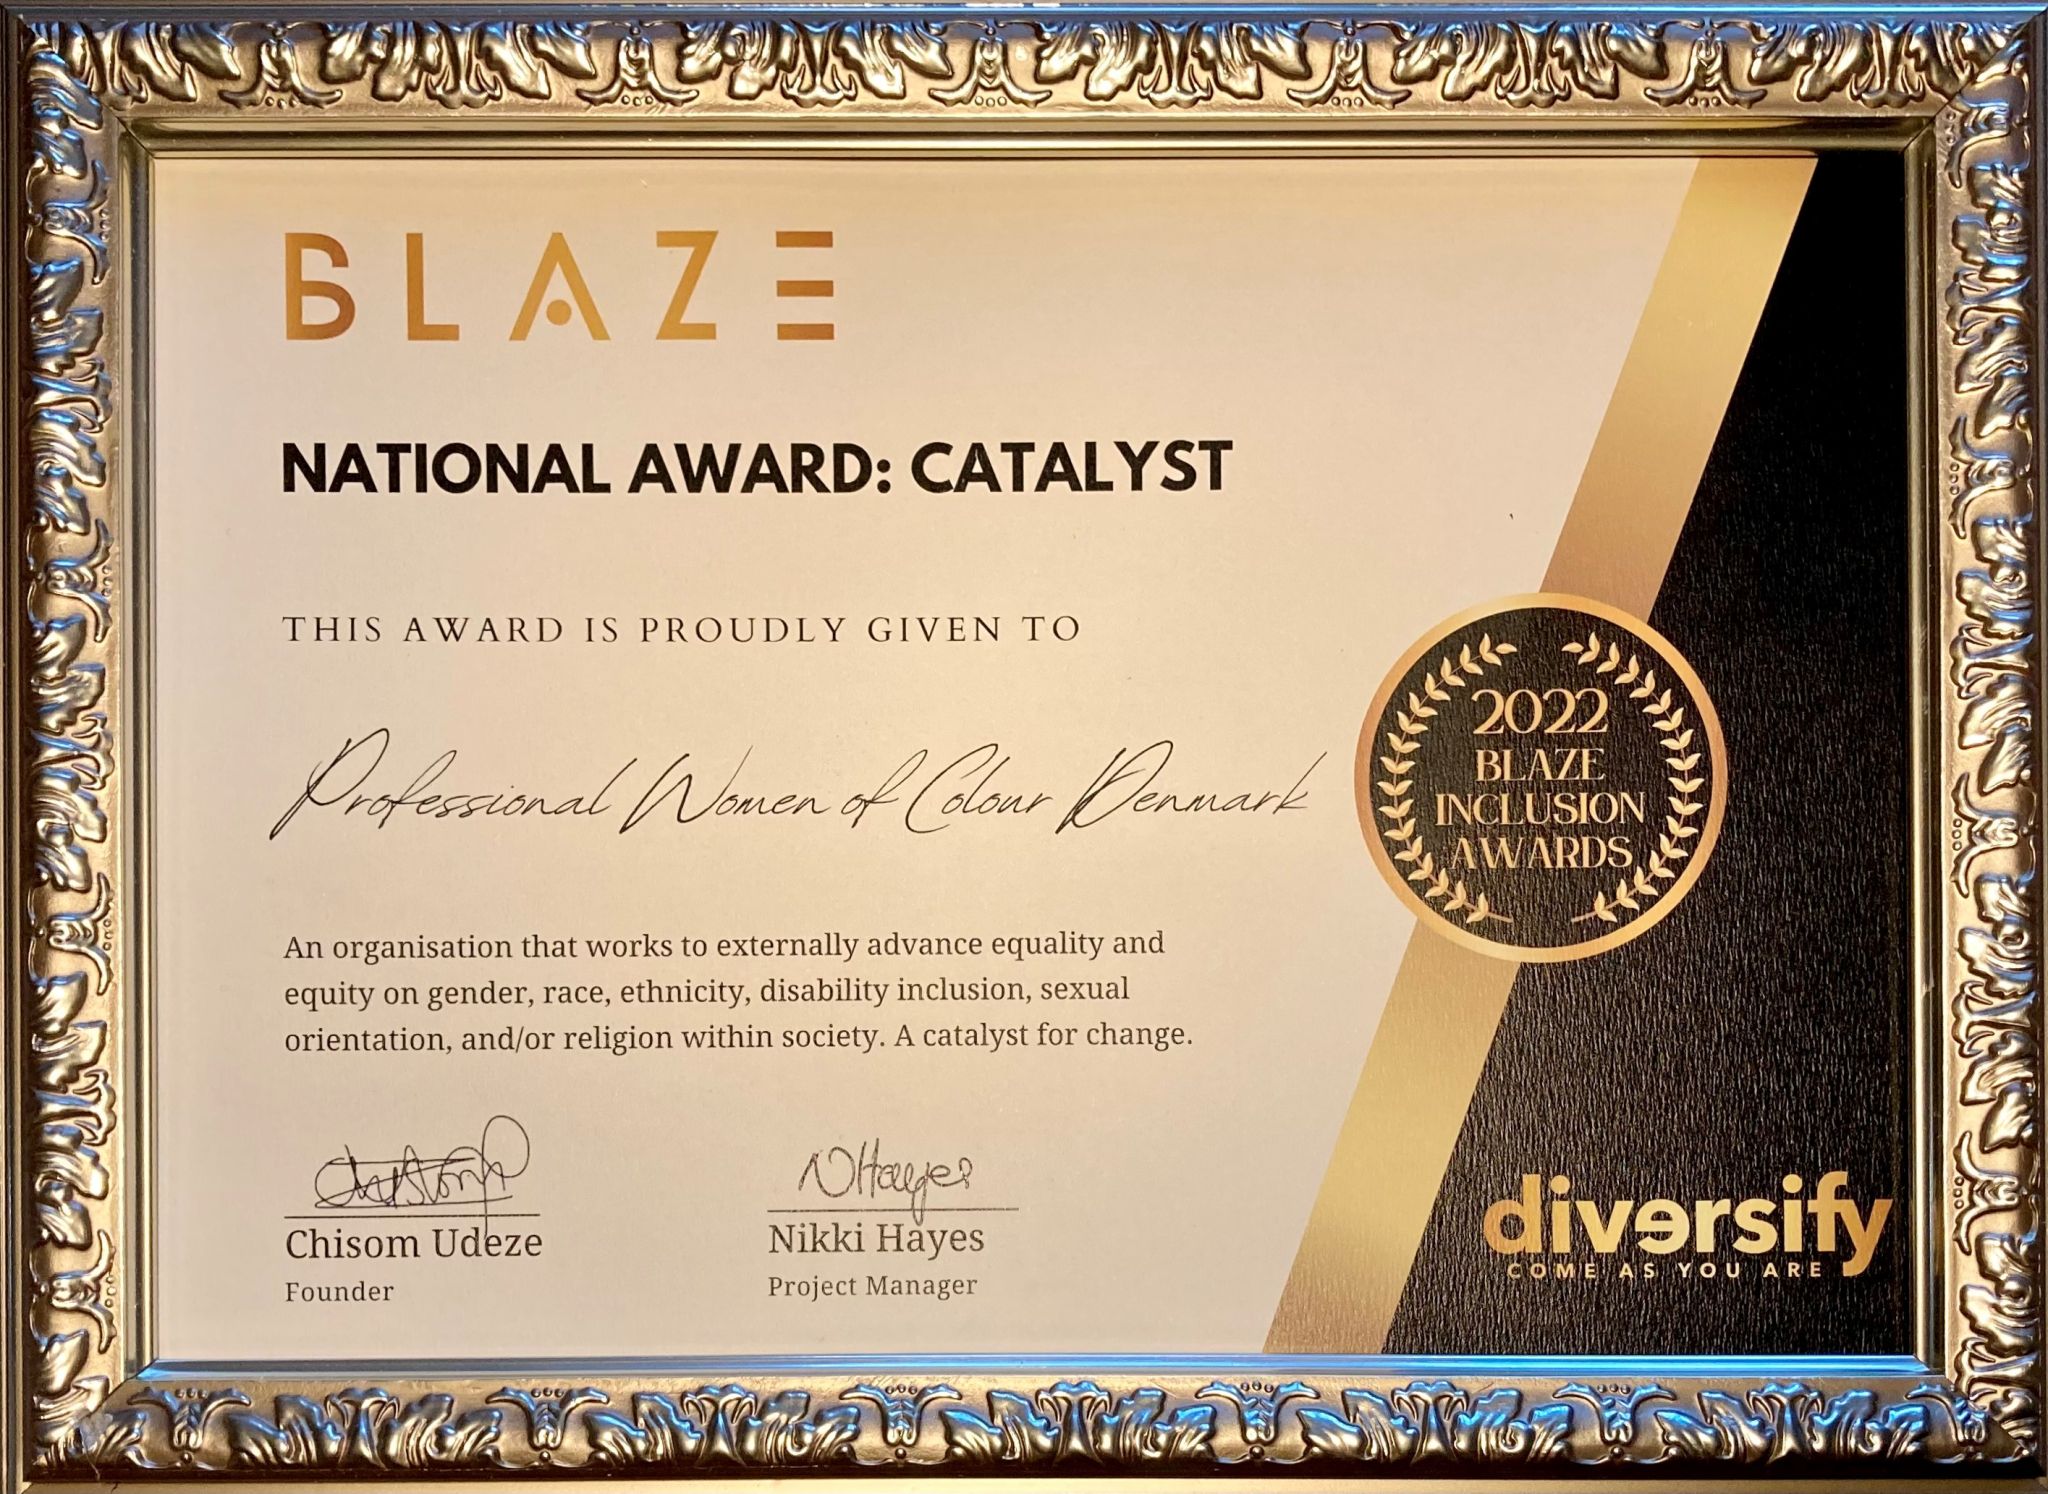 Nordic Blaze Inclusion Award in the Catalyst category